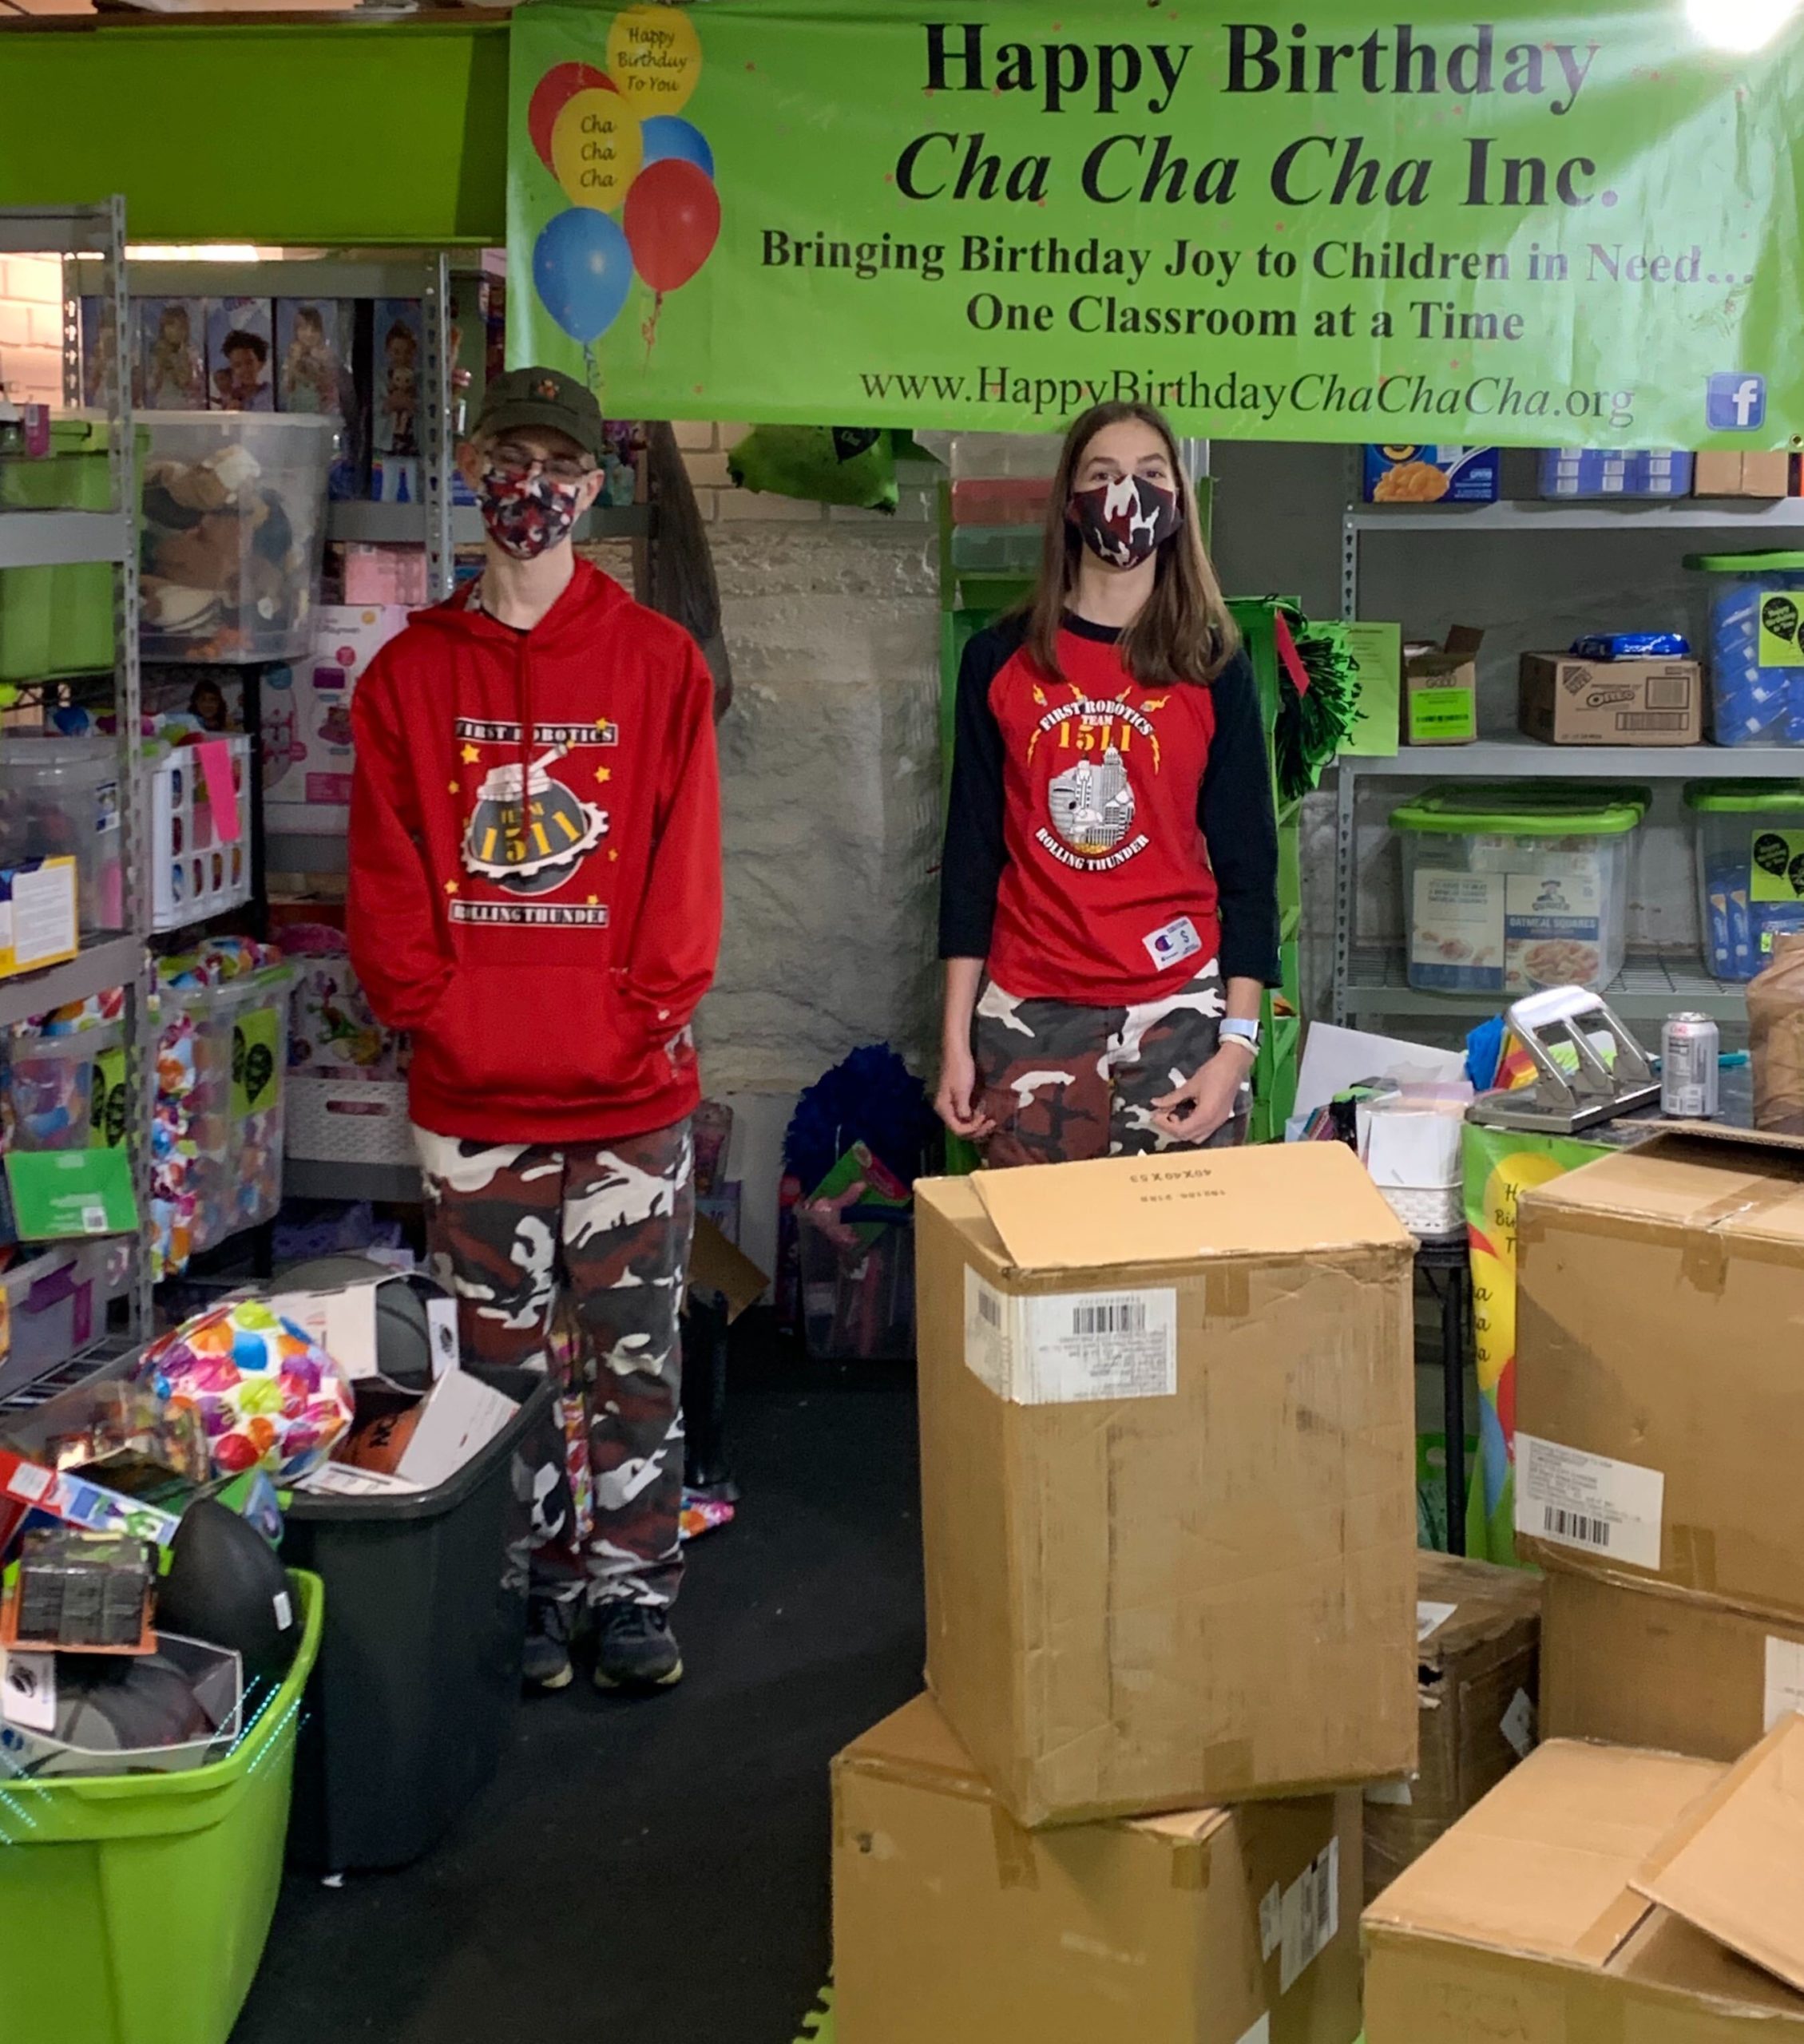 2 students standing in front of Happy Birthday Cha Cha Cha Sign with boxes of donations for Happy Birthday Cha Cha Cha